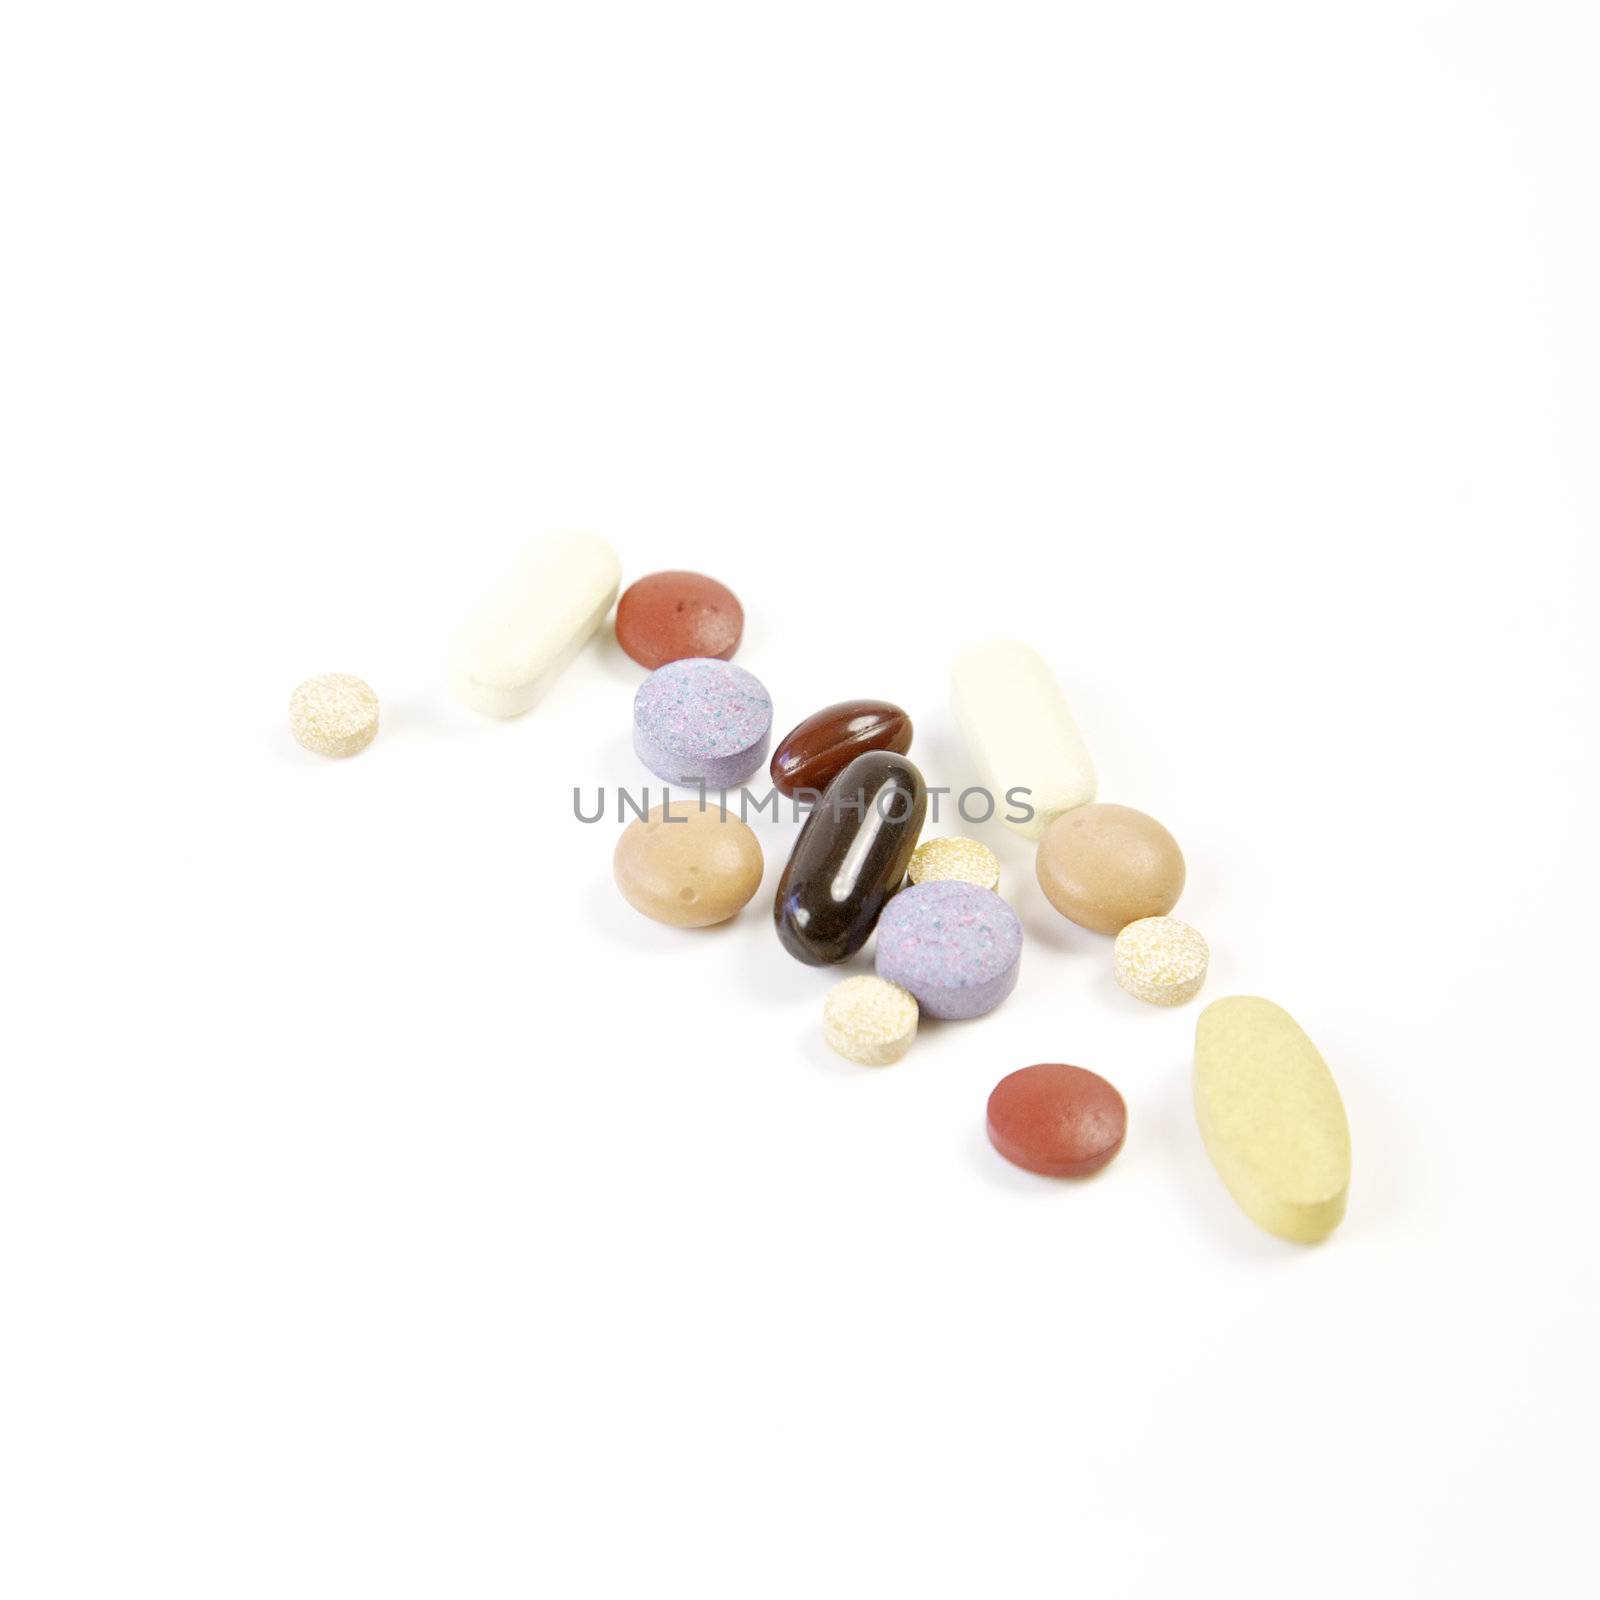 Pills and capsules by instinia